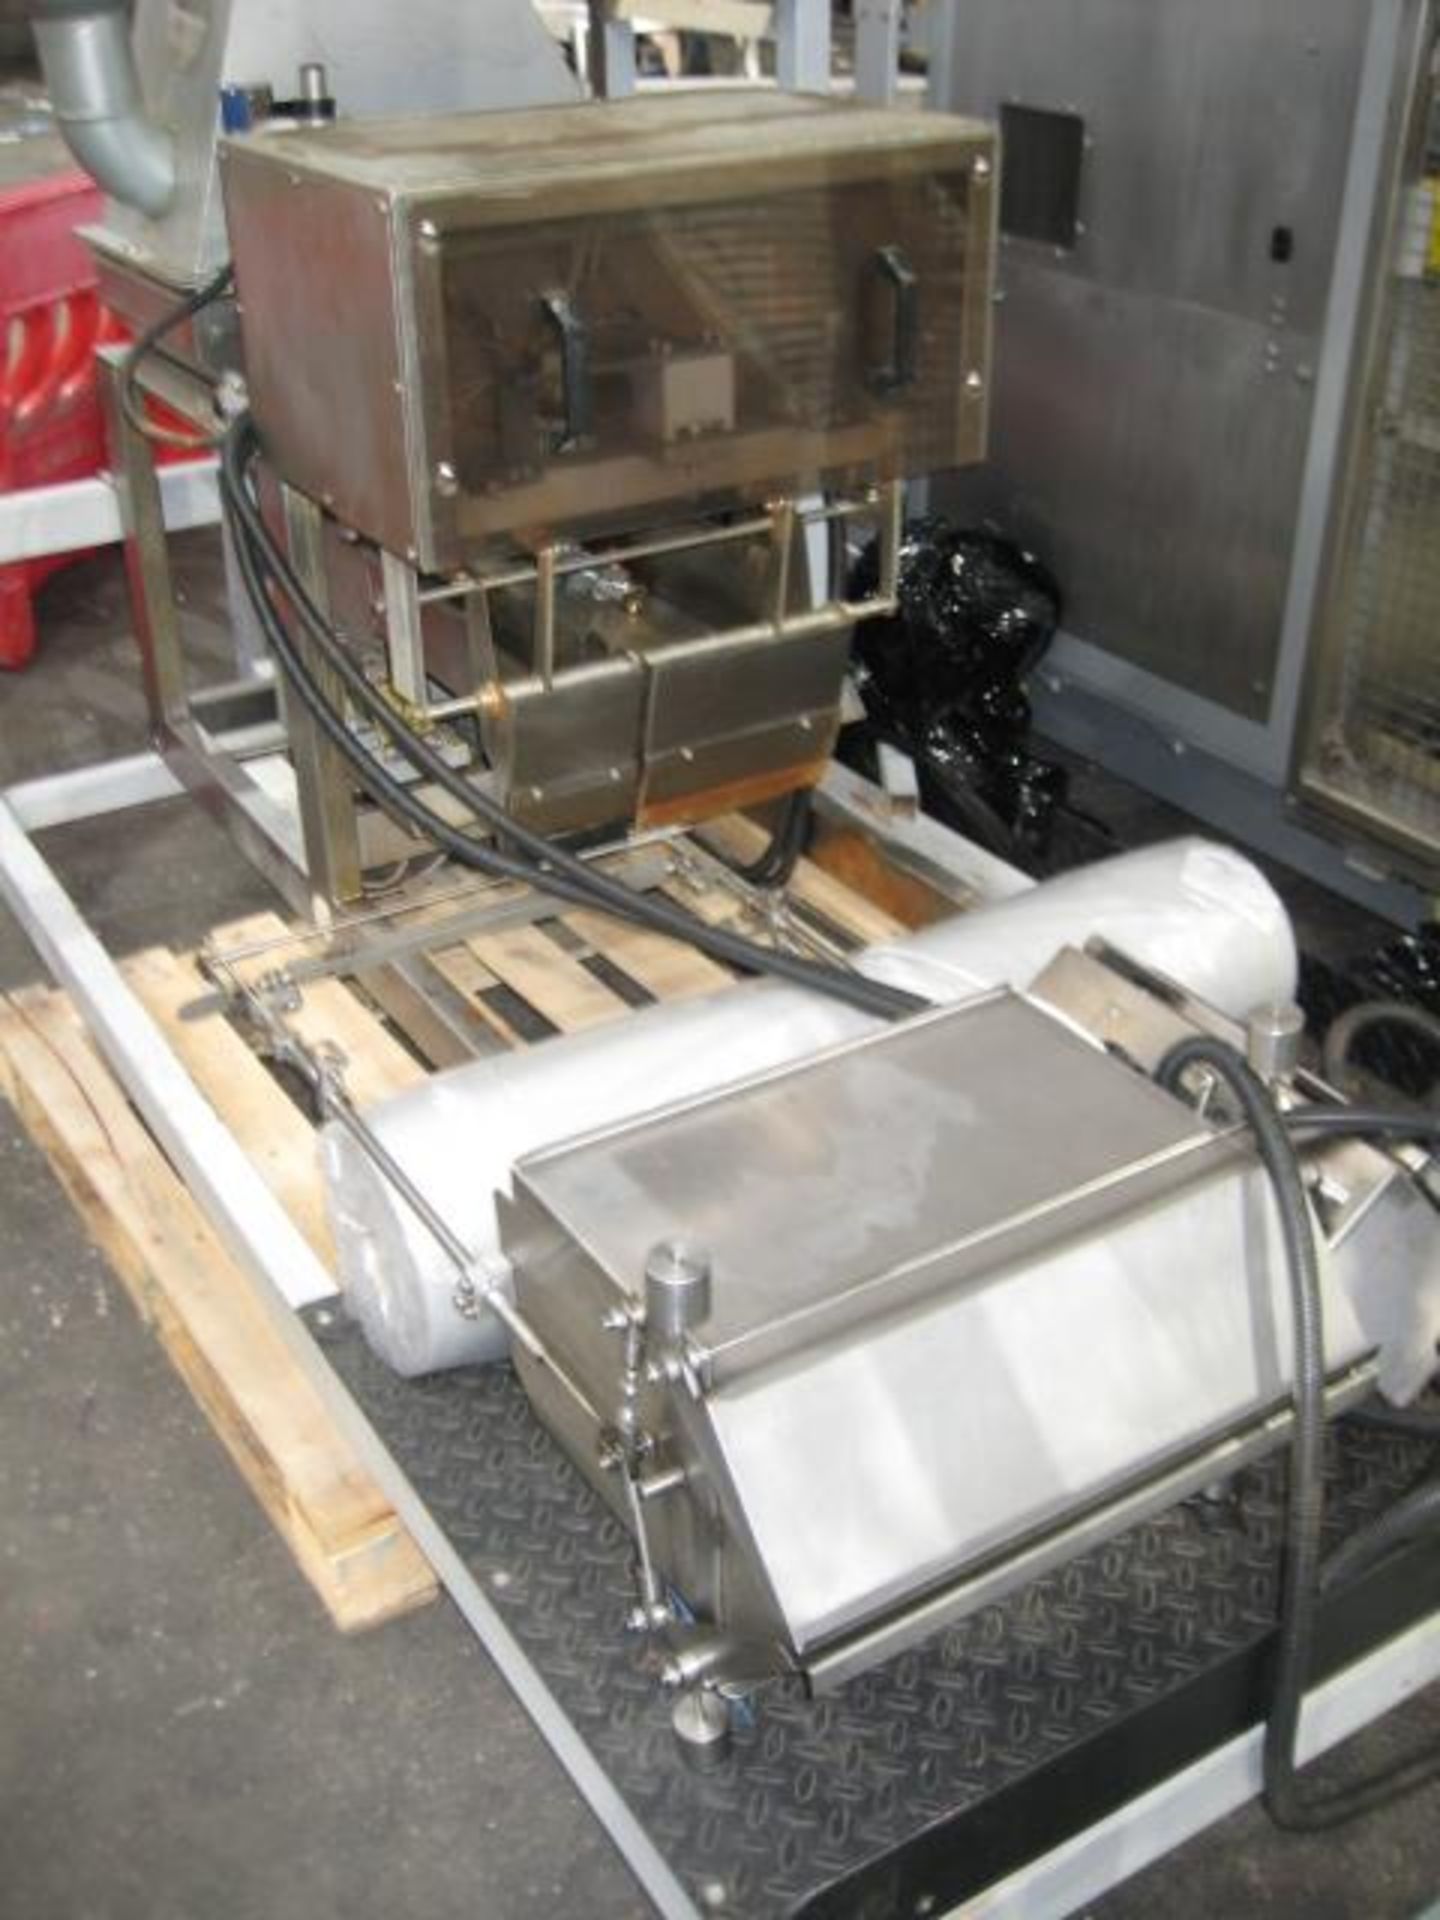 Weigher - Ward Bekker Digiway single channel linear weigher in stainless steel with control box. - Image 4 of 10